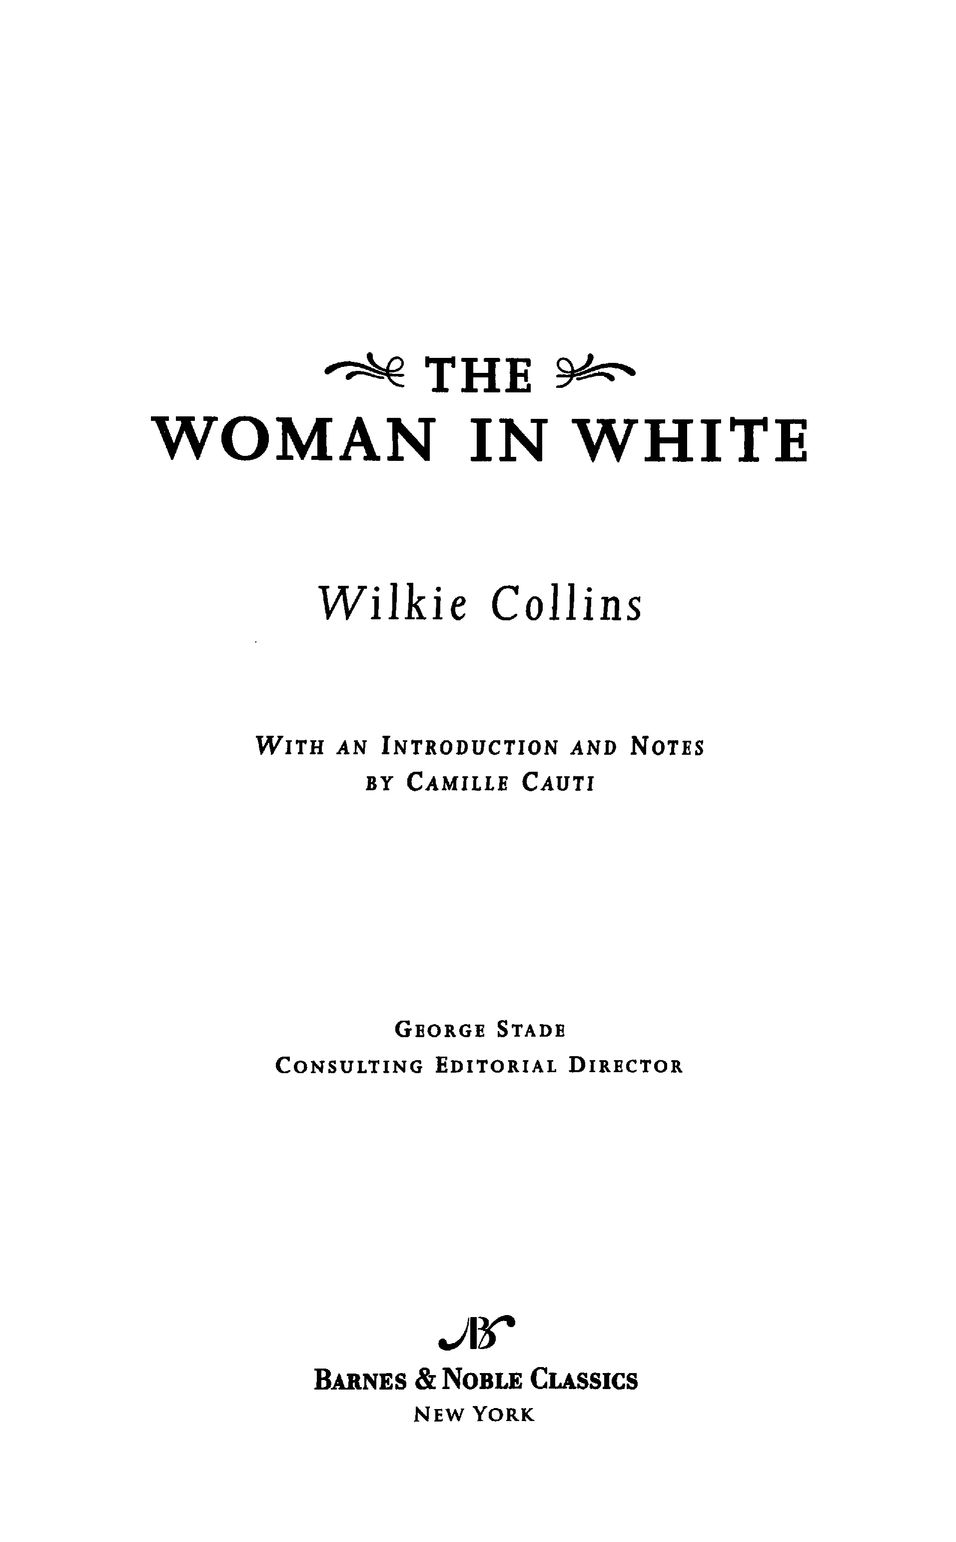 WILKIE COLLINS William Wilkie Collins was born in London on January 8 1824 - photo 2